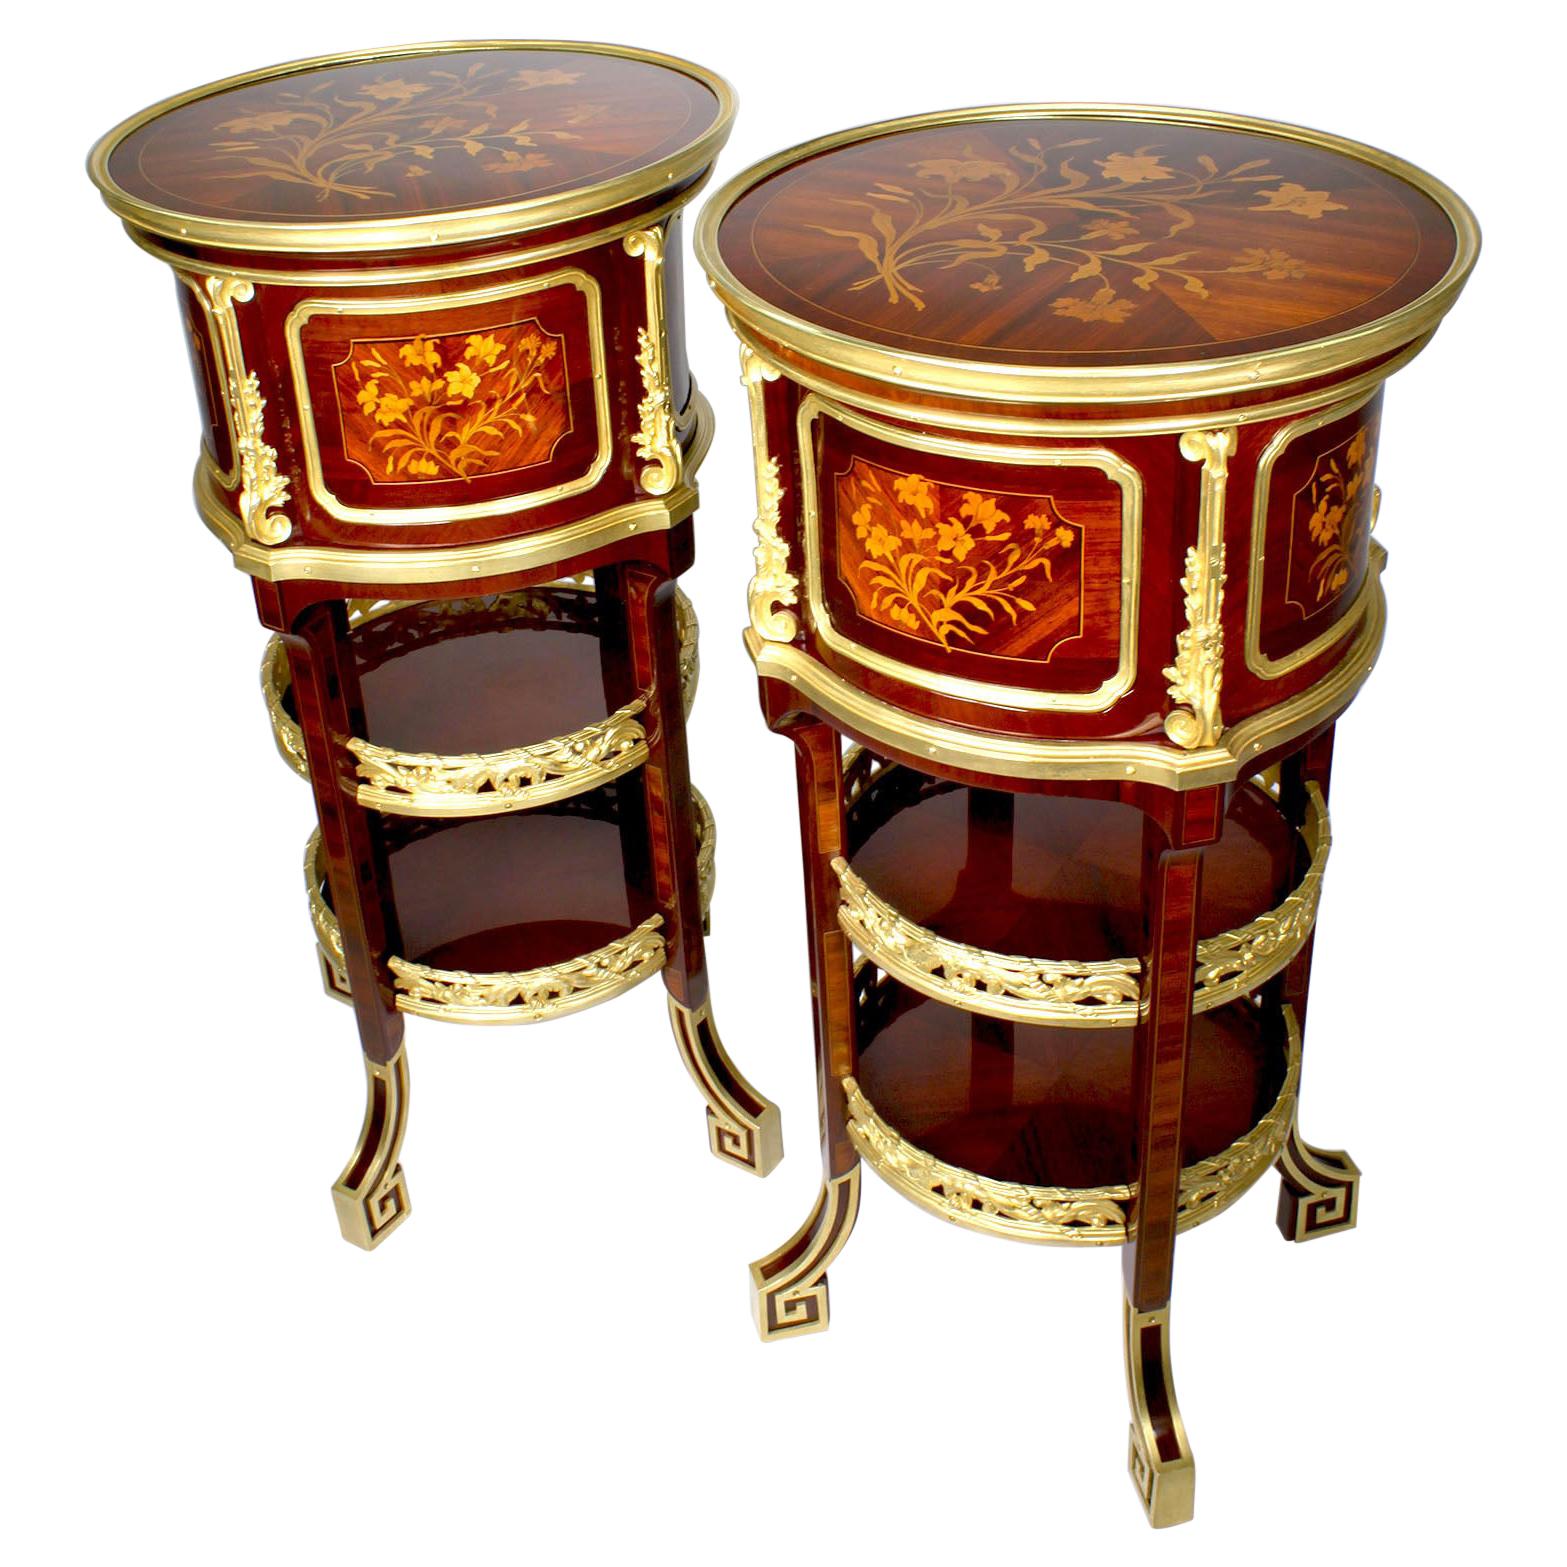 Pr French 19th-20th Century Ormolu Mounted Side-Tables Zwiener-Jansen Successeur For Sale